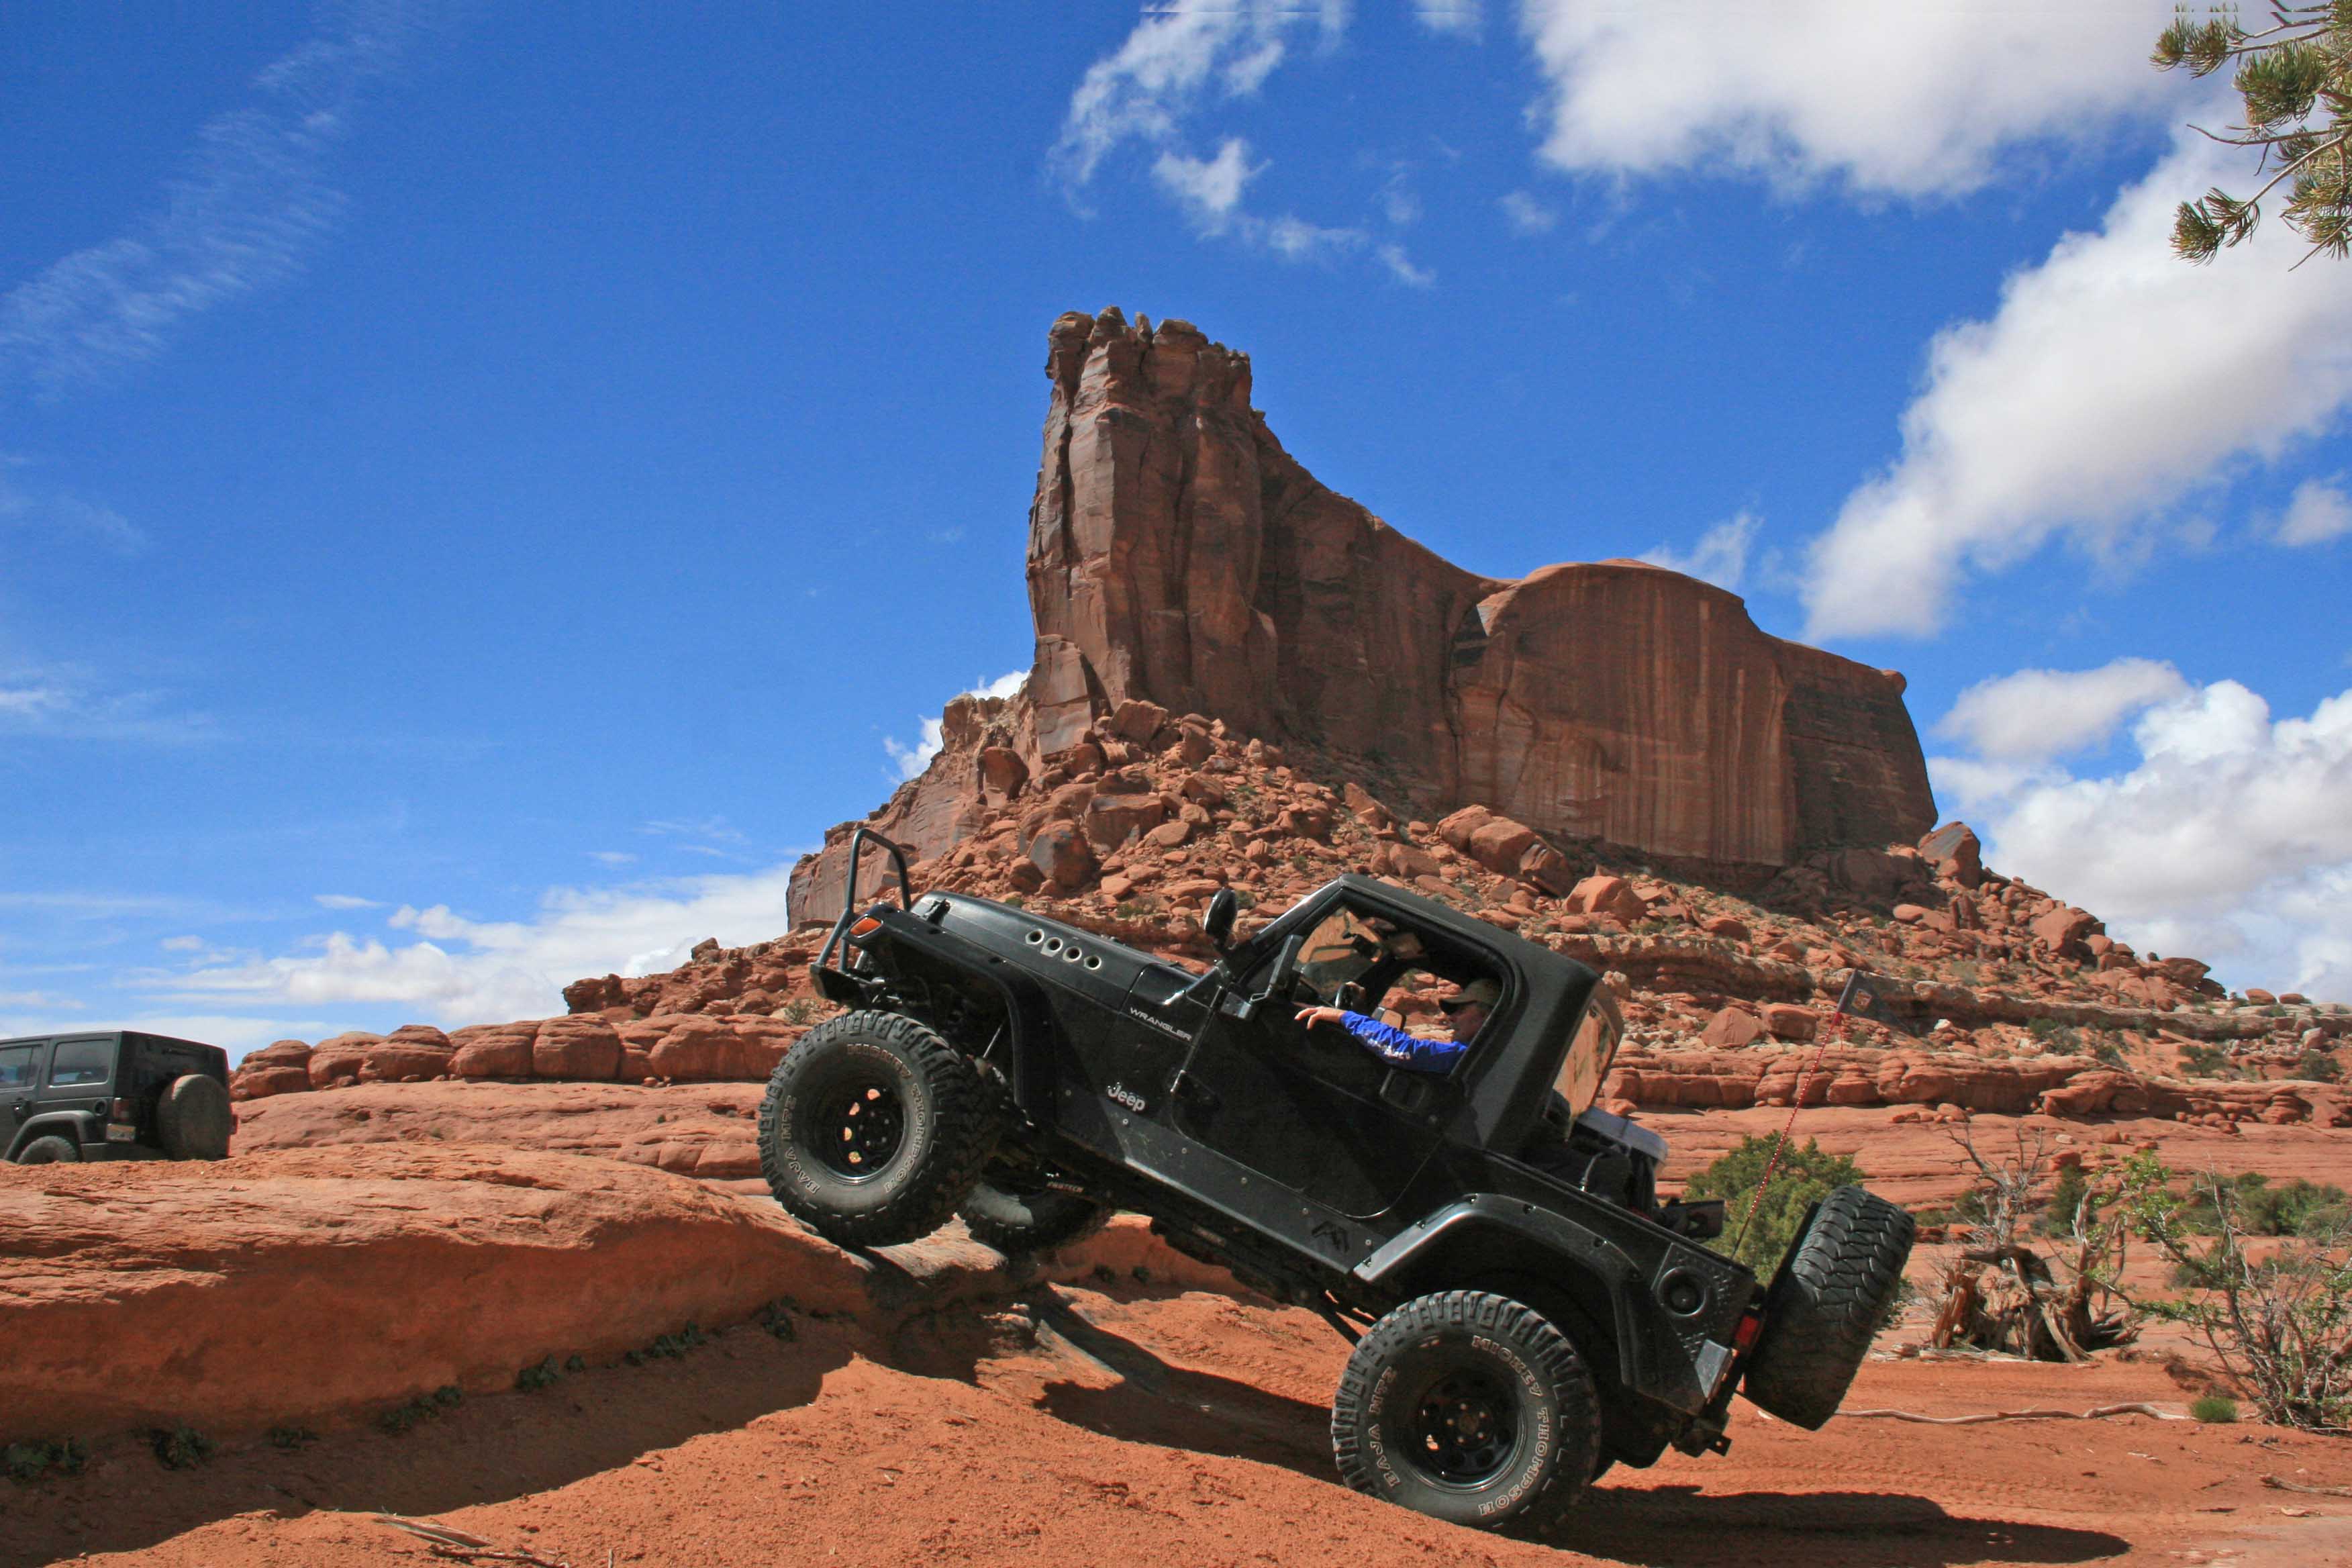 Red Rocks, Jeeps, And Good Times: This Must Be Moab